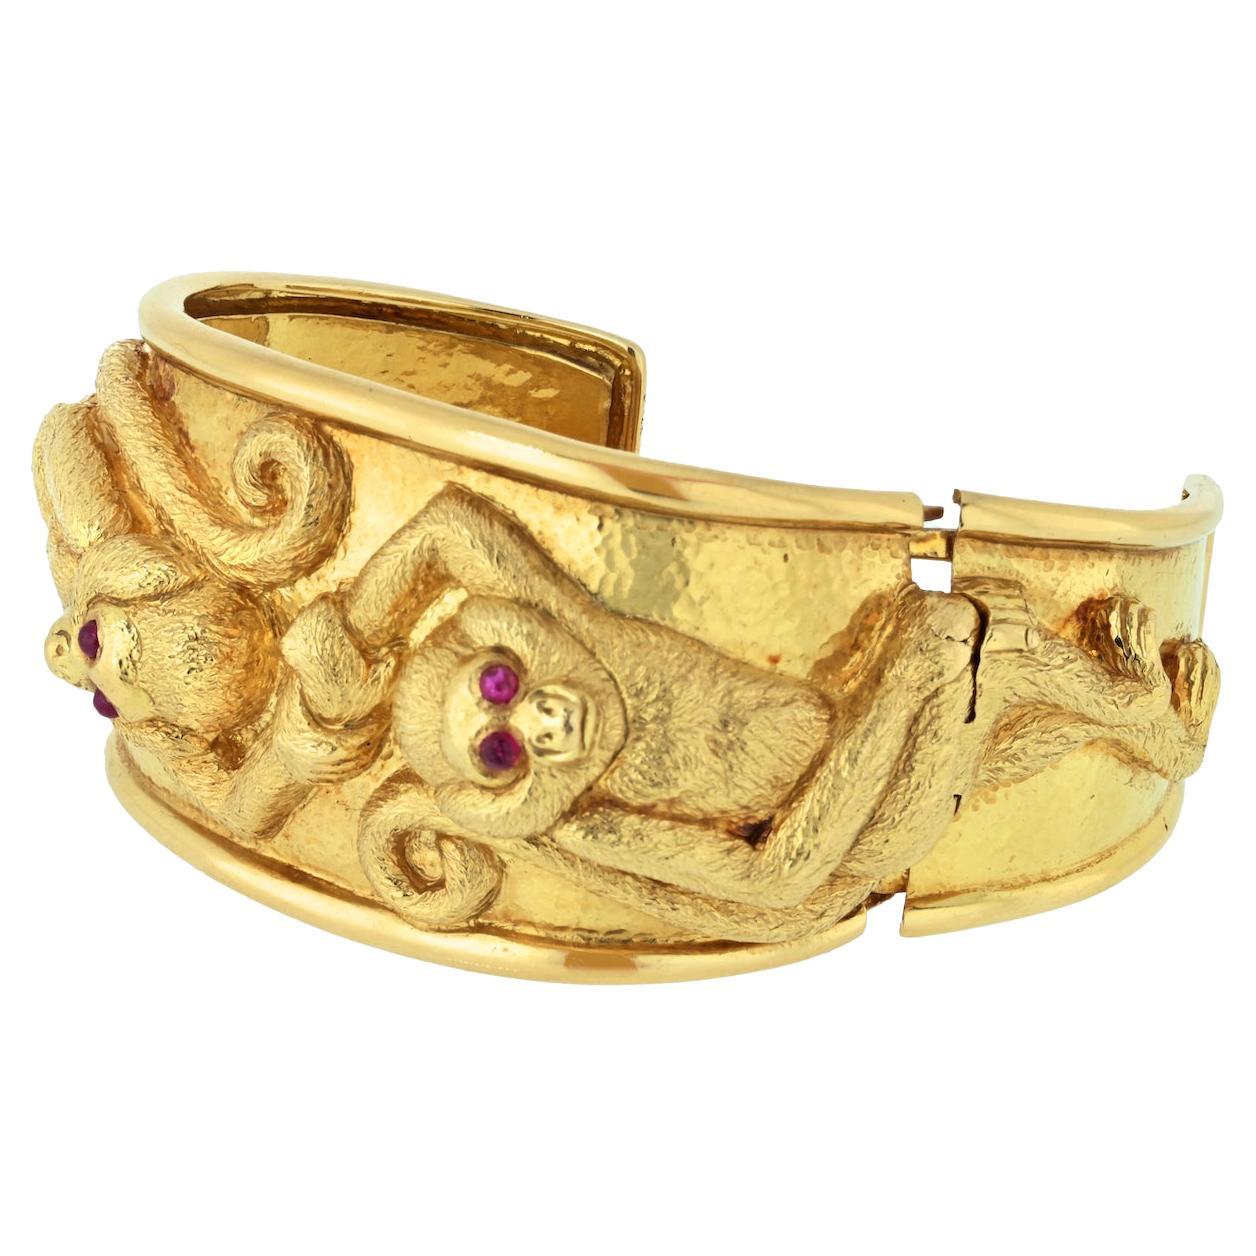 Indulge in the whimsical charm of the David Webb Repoussé Monkey Cuff, a masterfully crafted piece in 18K Yellow Gold that captures the playful spirit of two monkeys holding hands.

**Key Features:**

1. **Material:**
   - Meticulously crafted in